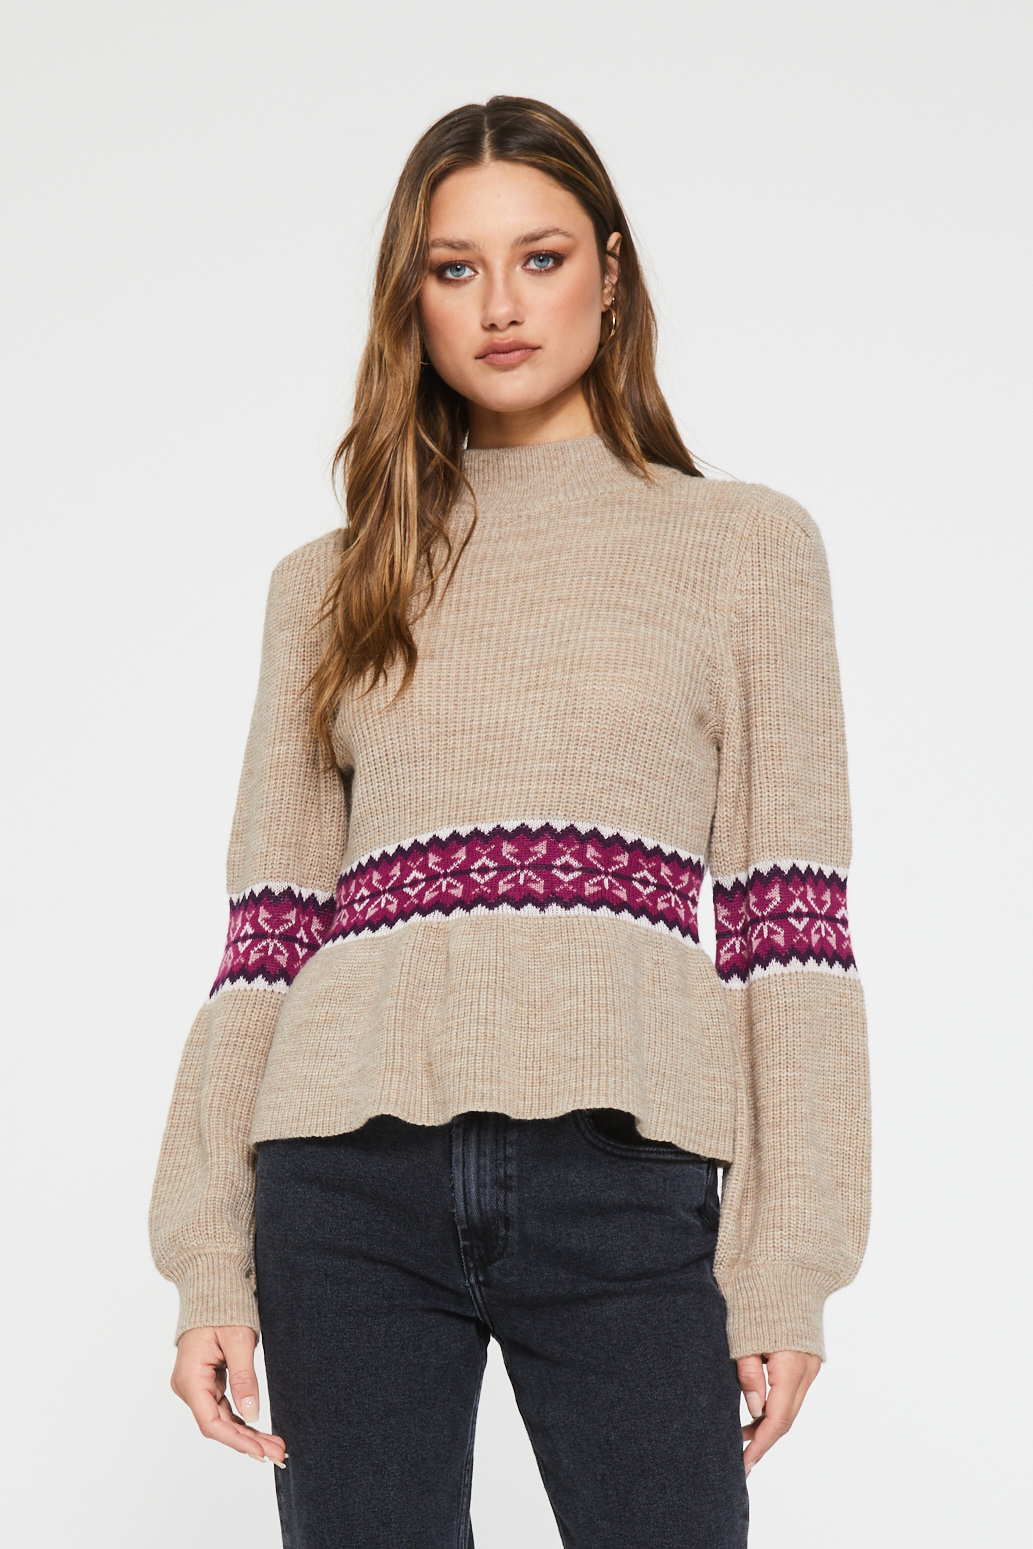 Felicia Tan Fitted Ski Sweater - Frontier Justice